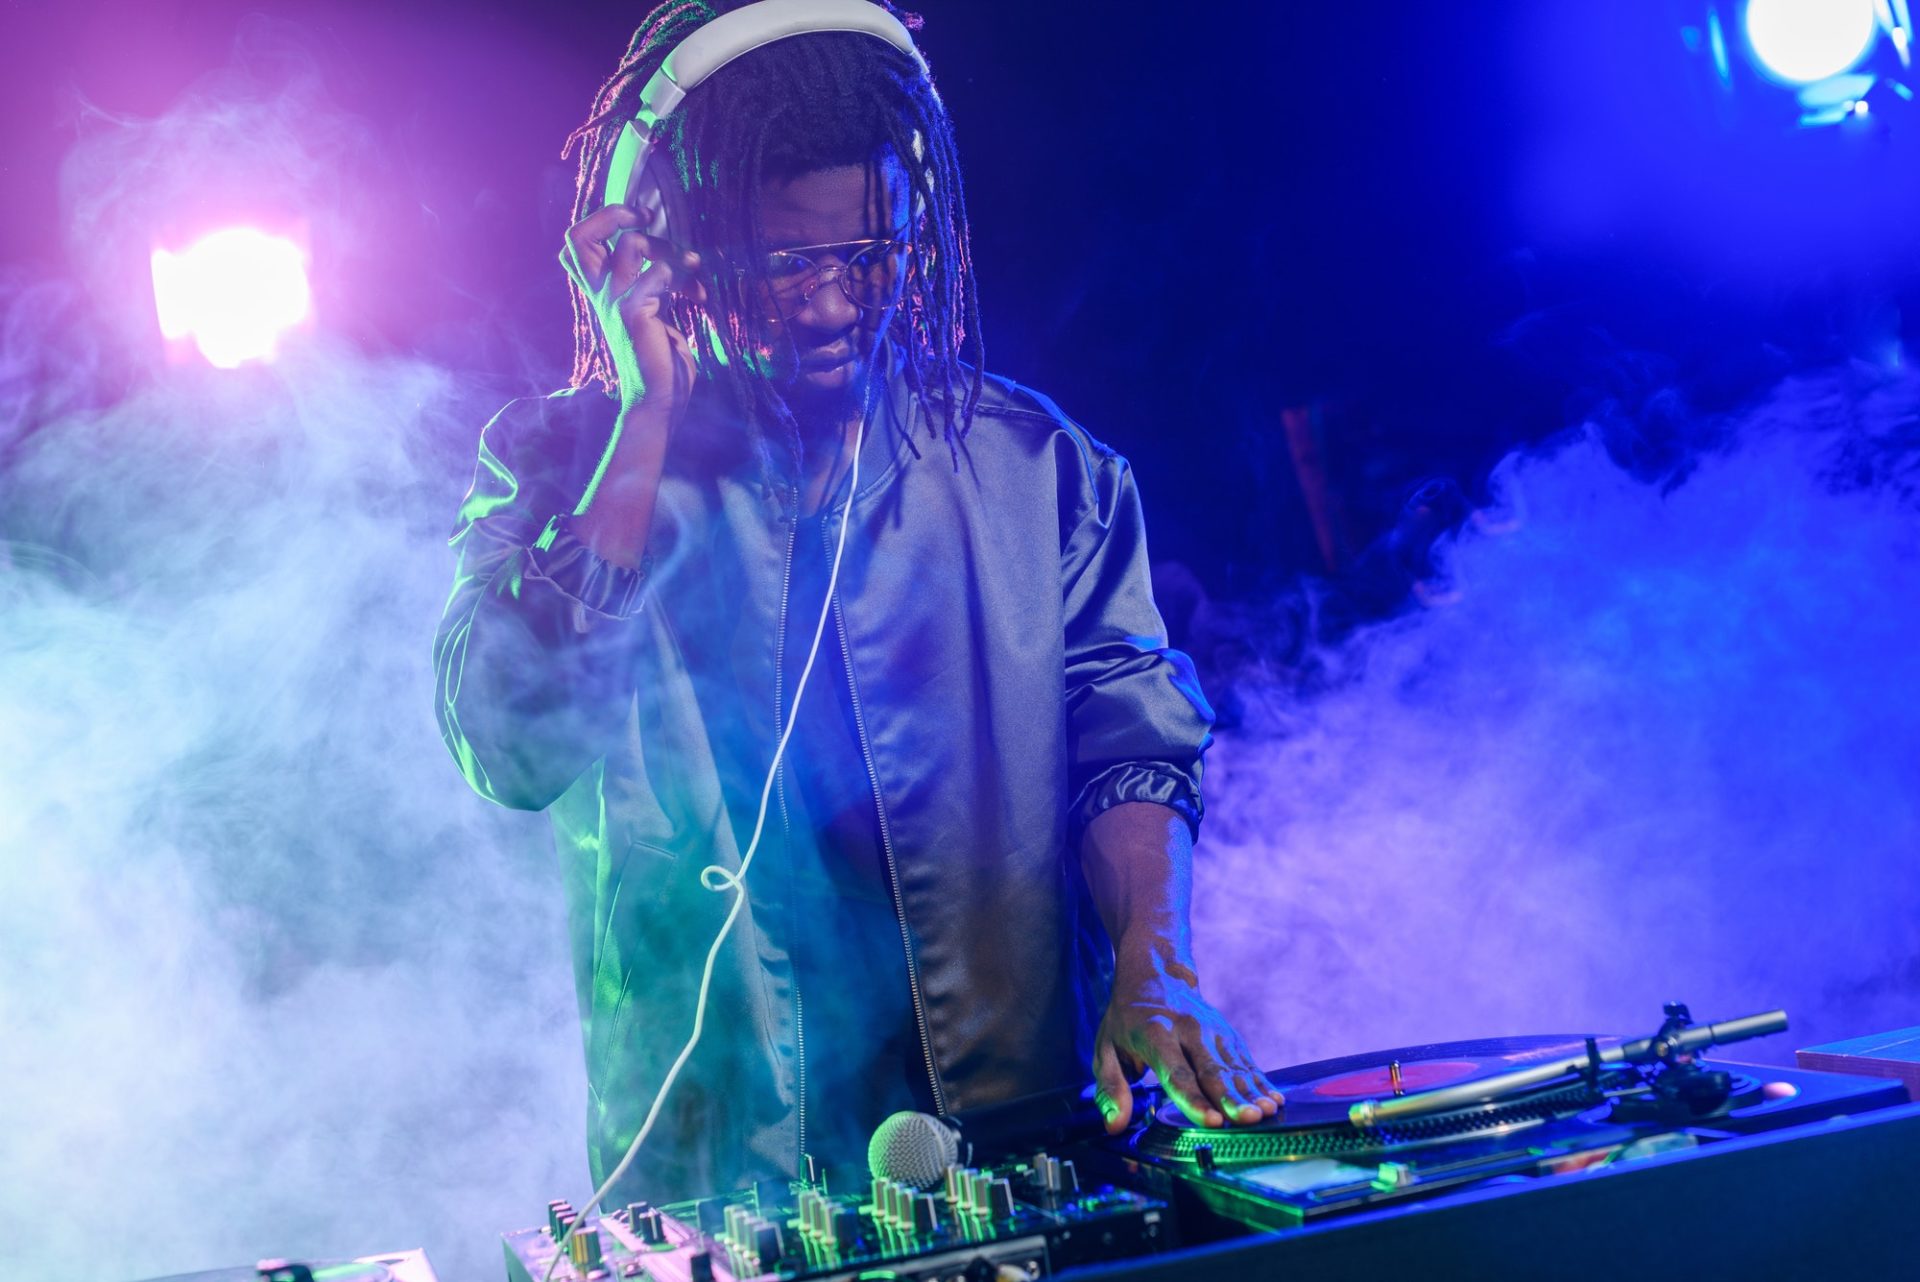 professional african american club DJ in headphones with sound mixer in nightclub